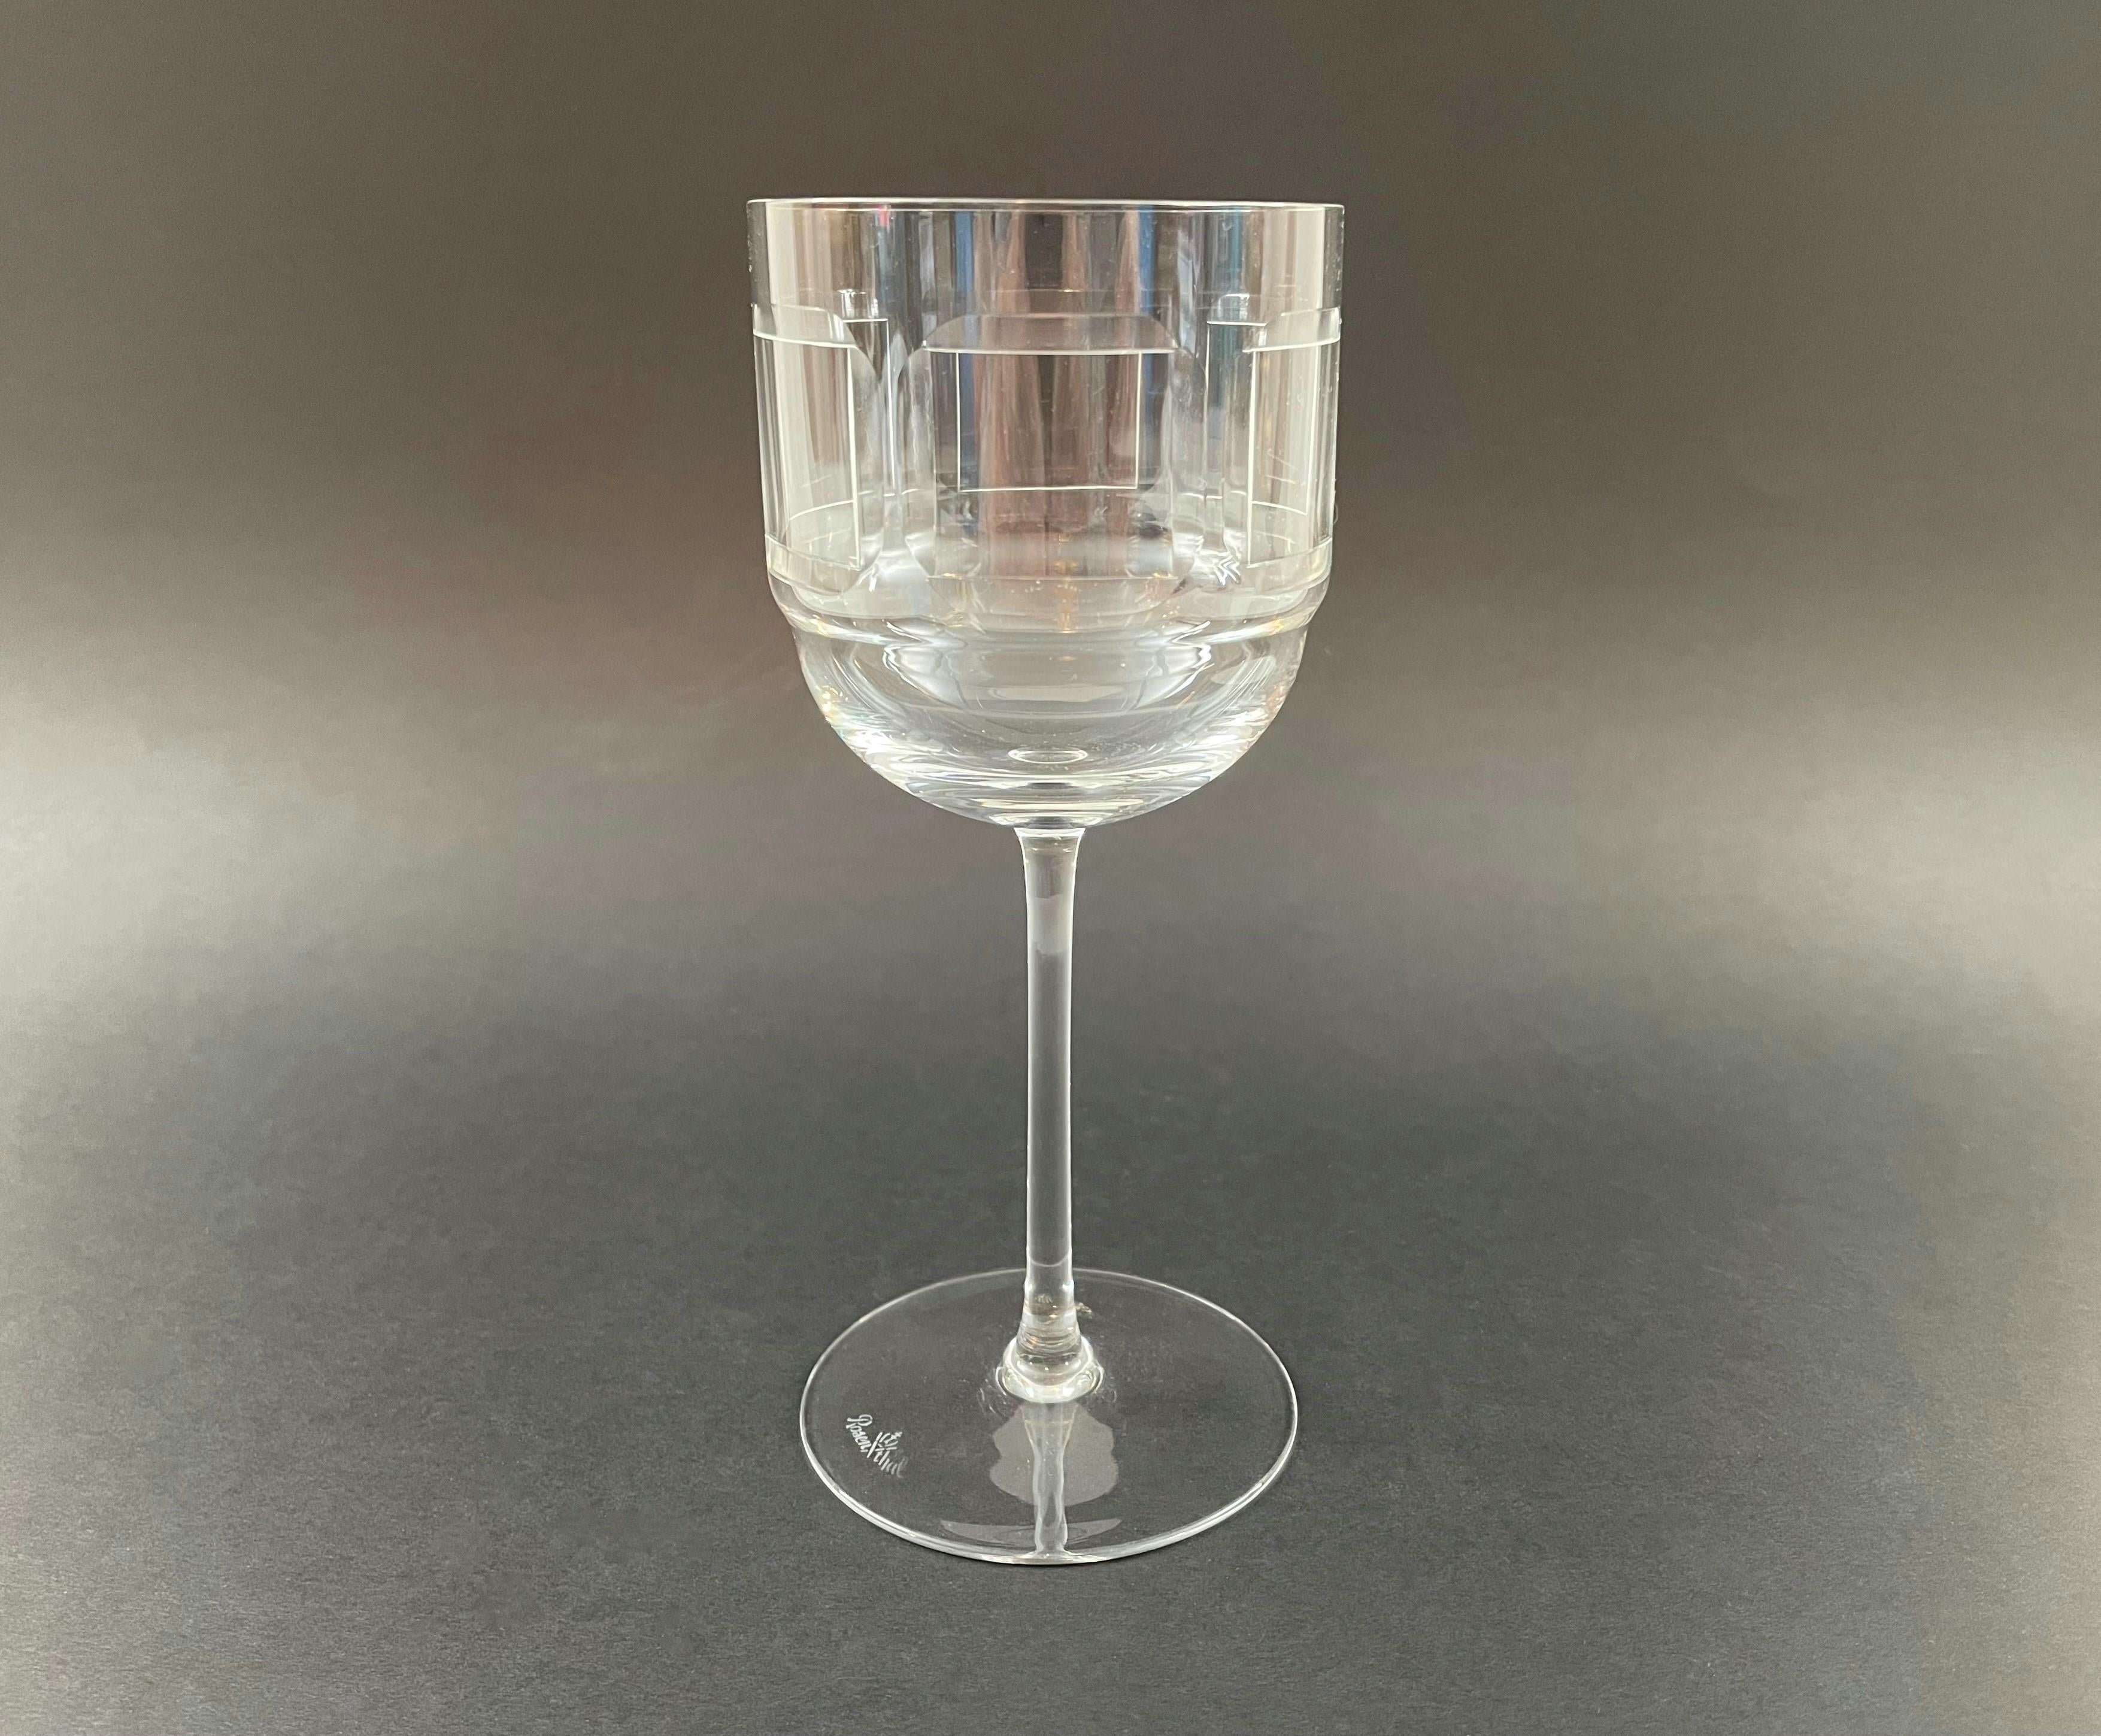 ROSENTHAL (Manufacturer) - SQUARES (Pattern) - Rare Mid Century wheel cut clear crystal wine glass - featuring a band of six engraved squares to the outside - signed on the base - Germany - circa 1960's.

Excellent / mint vintage condition - no loss